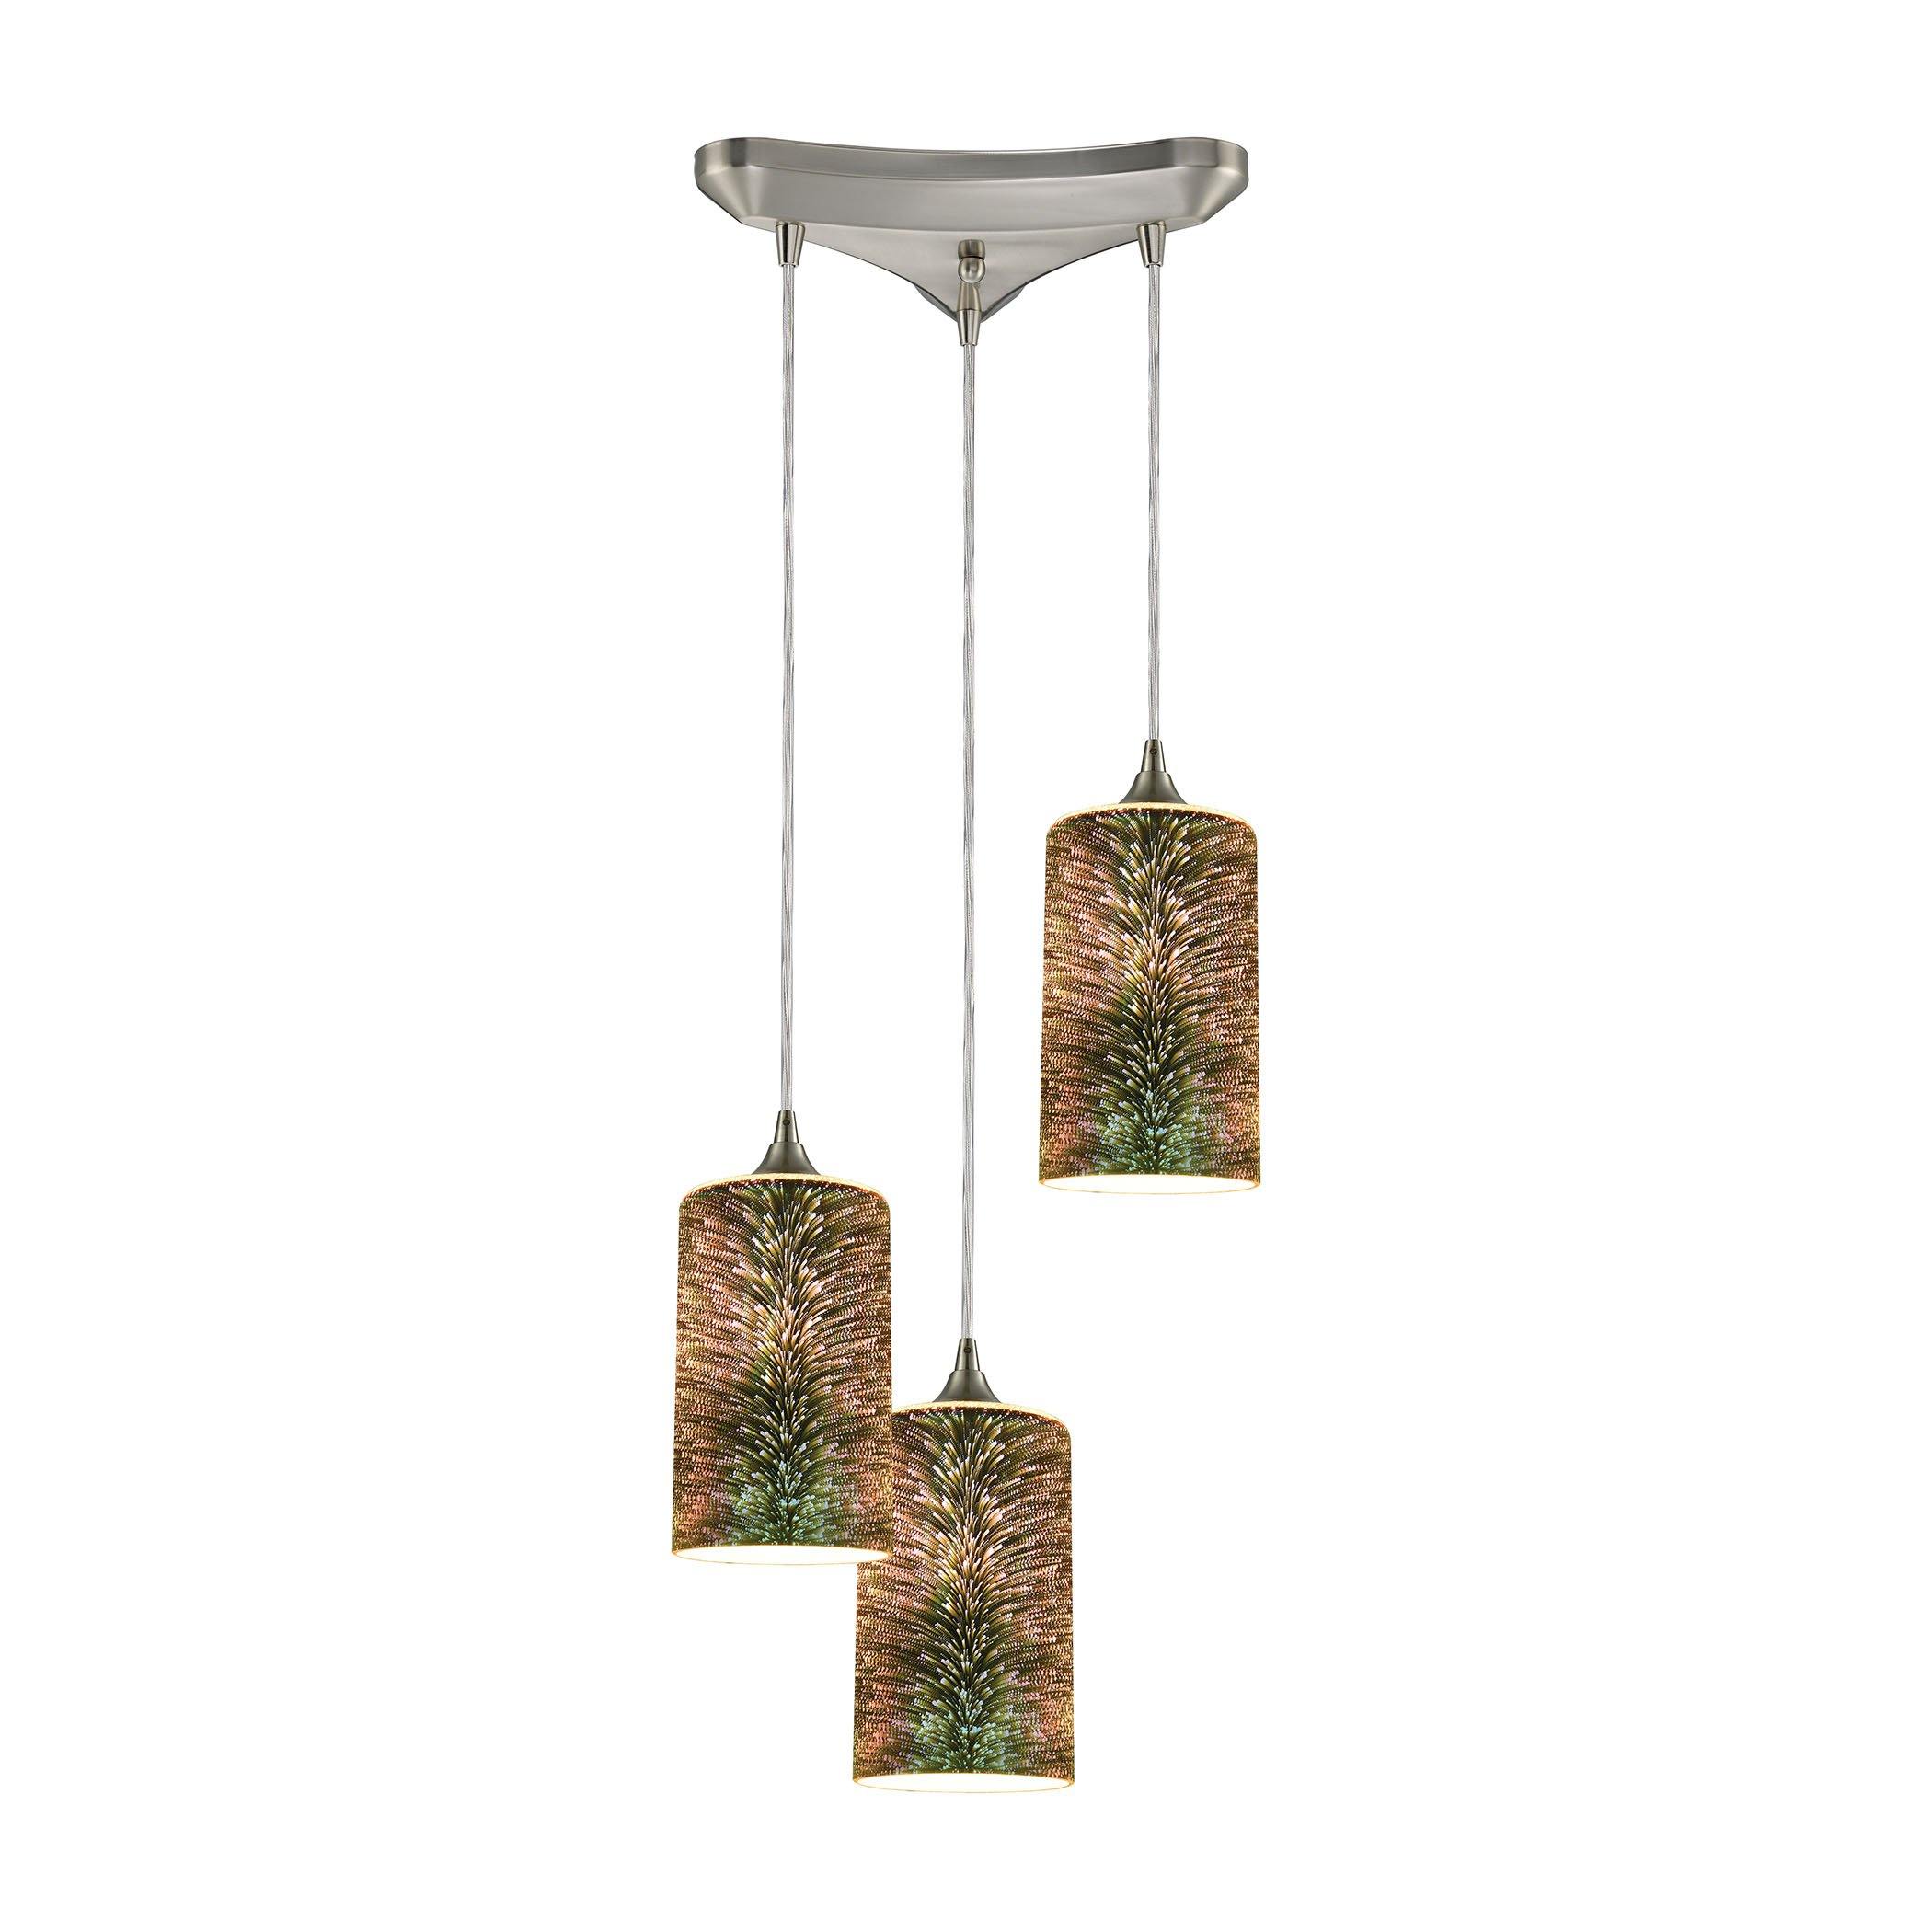 Illusions 3-Light Triangle Pan In Satin Nickel With 3-D Starburst Glass Pendant Ceiling Elk Lighting 